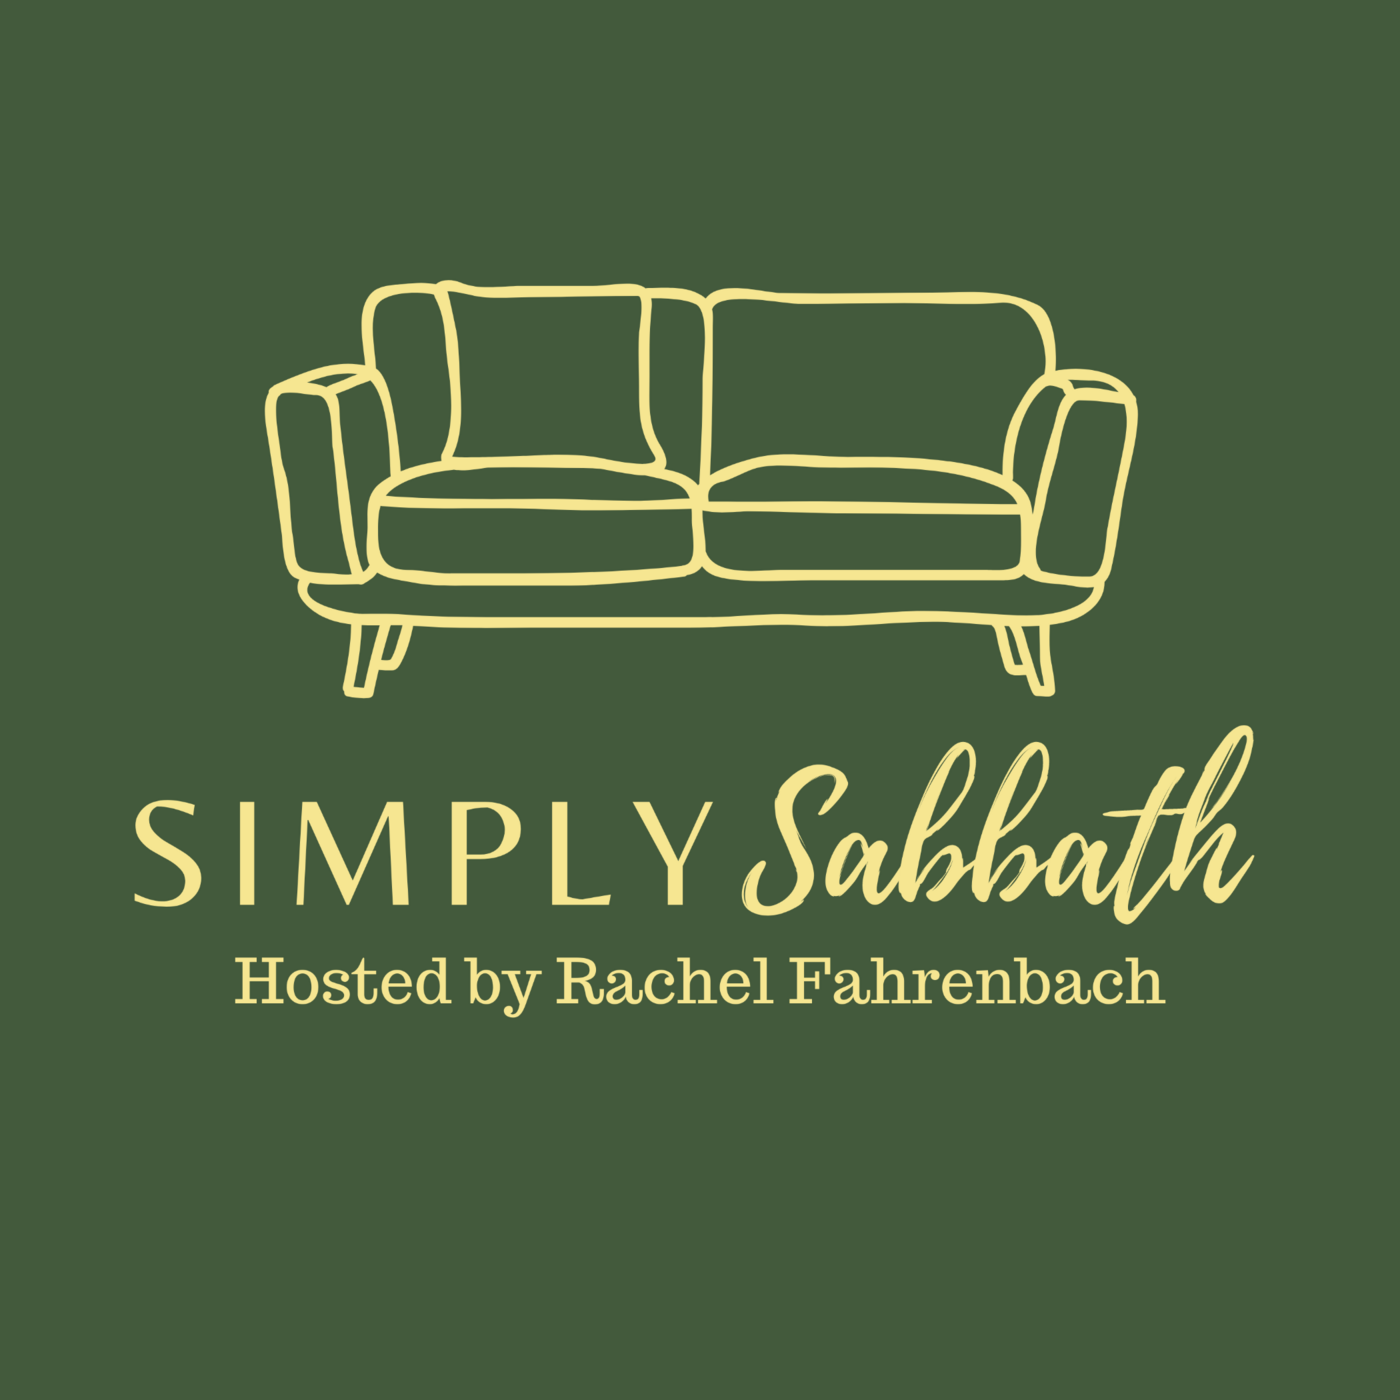 Ep 47: Seven Final Thoughts on Keeping the Sabbath